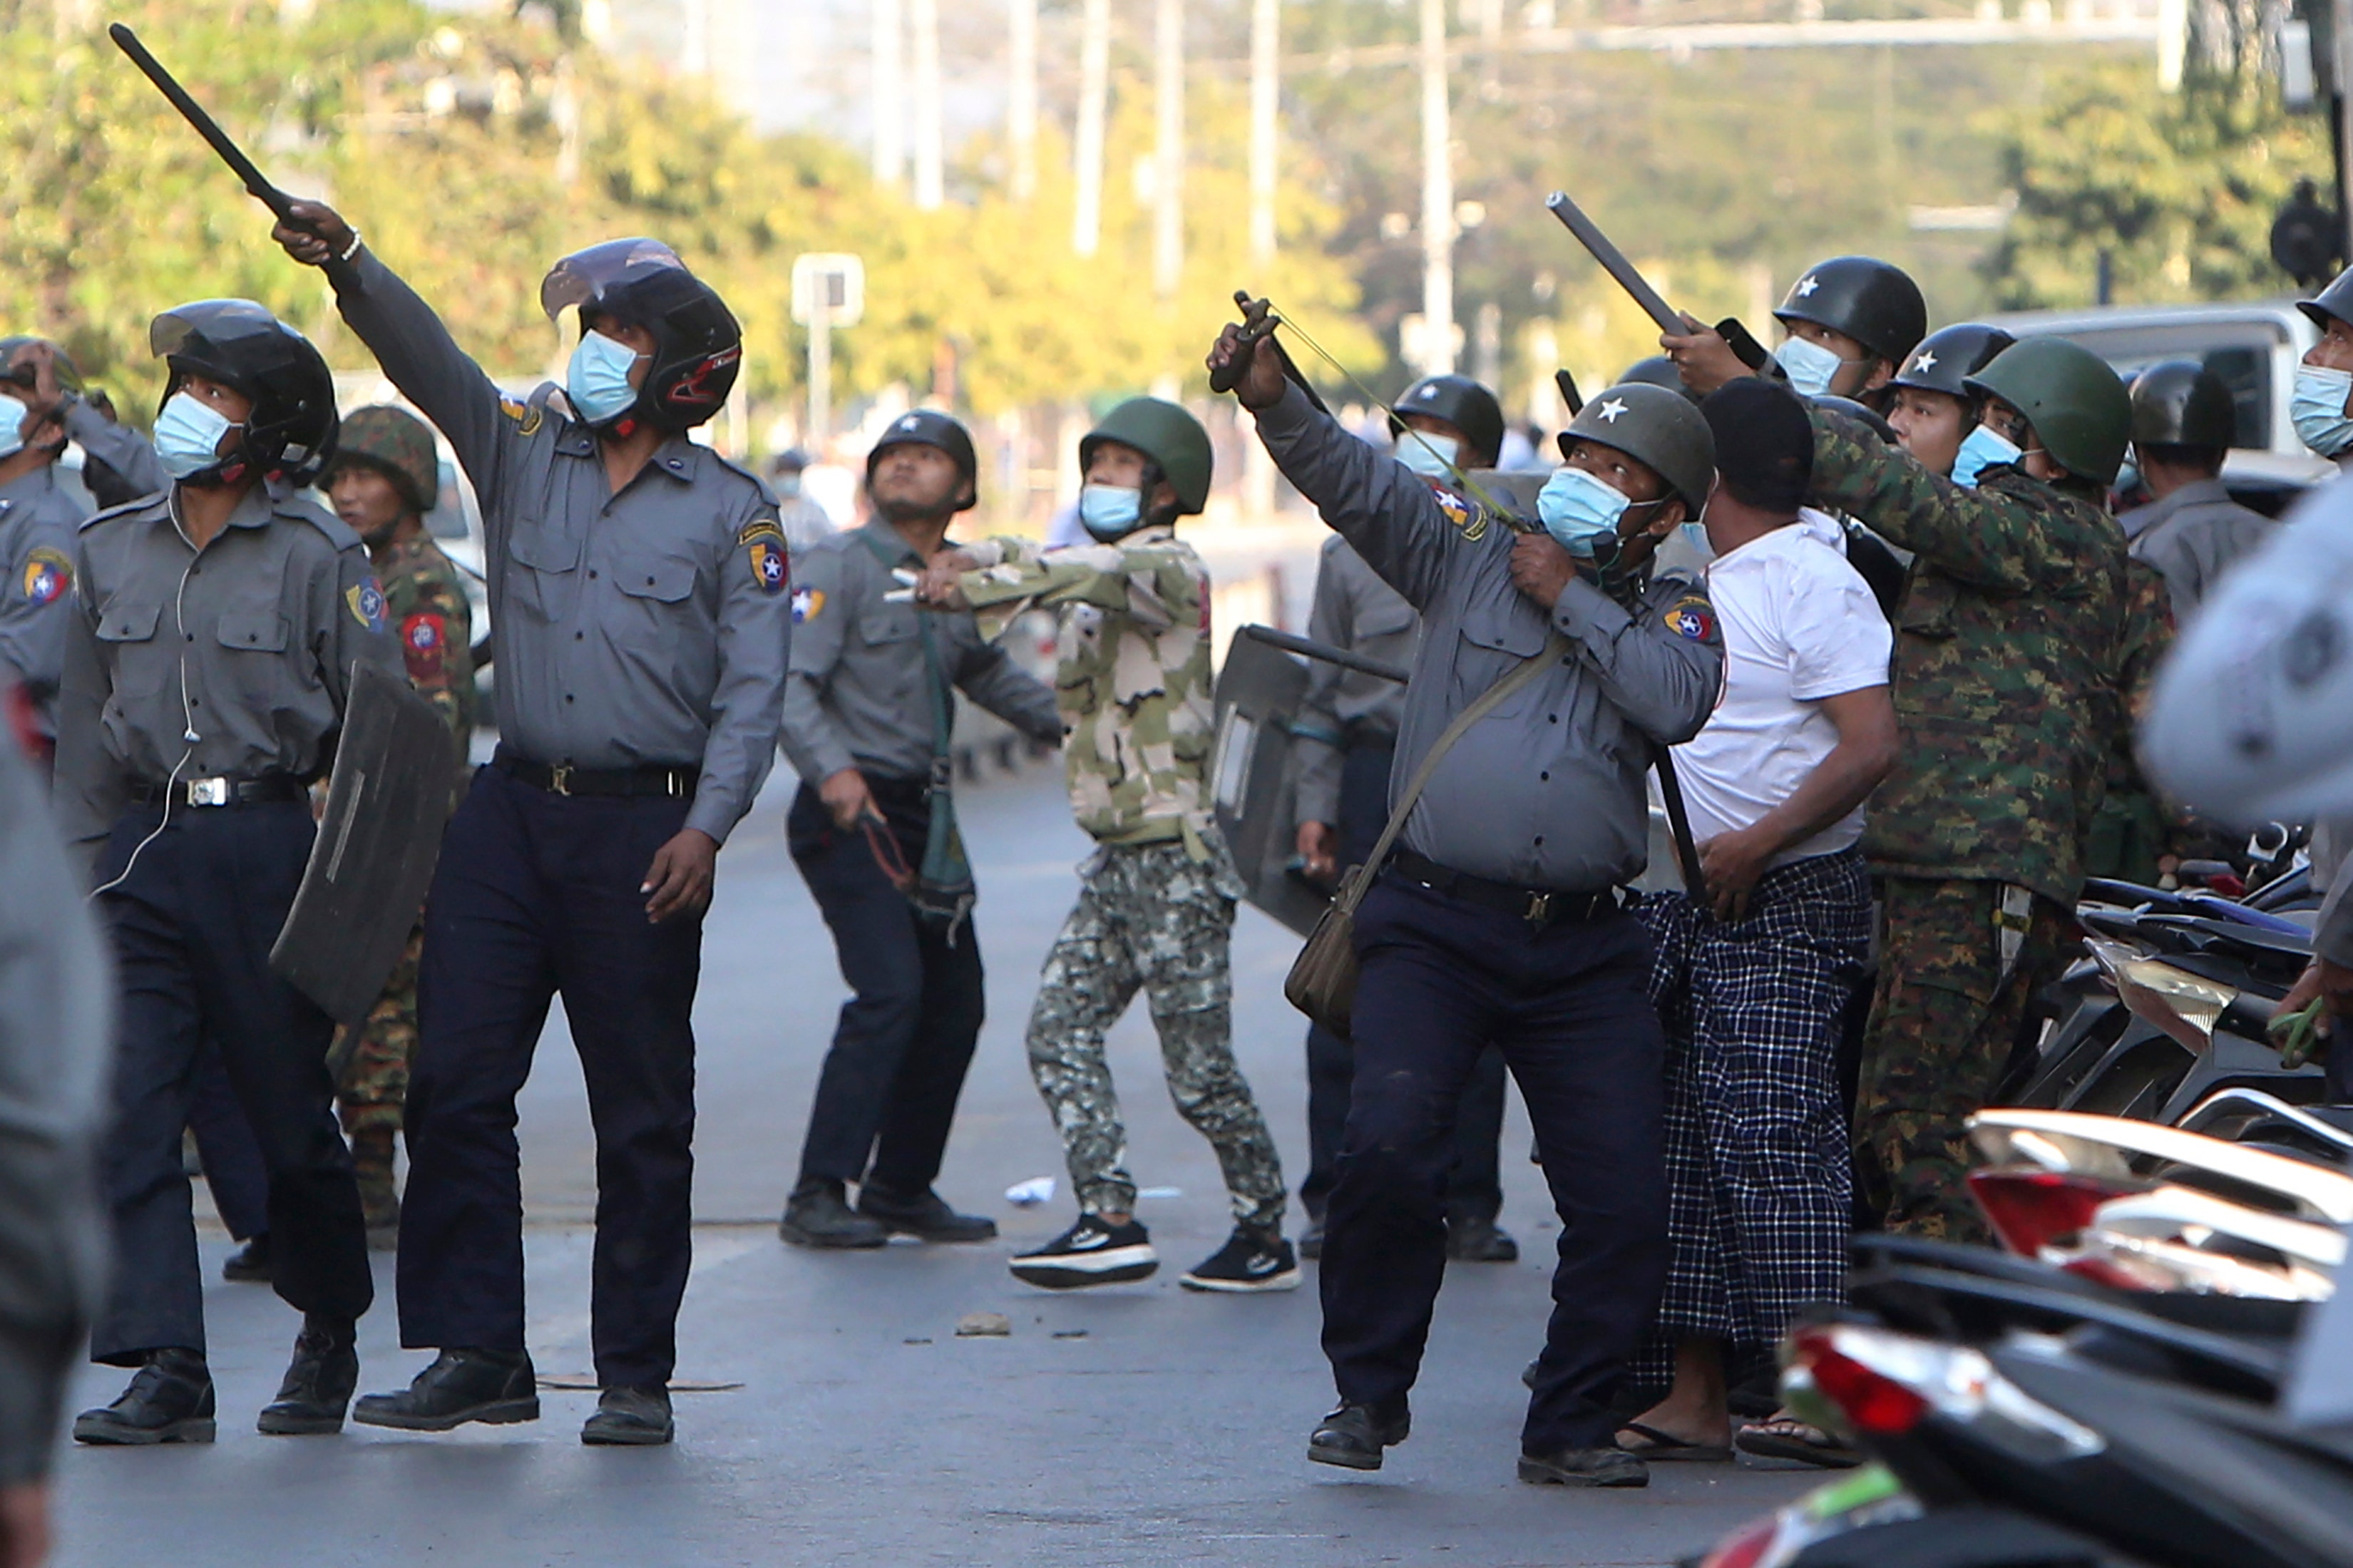 Burma security forces continue to intimidate with protests, US embassy authorizes voluntary evacuation